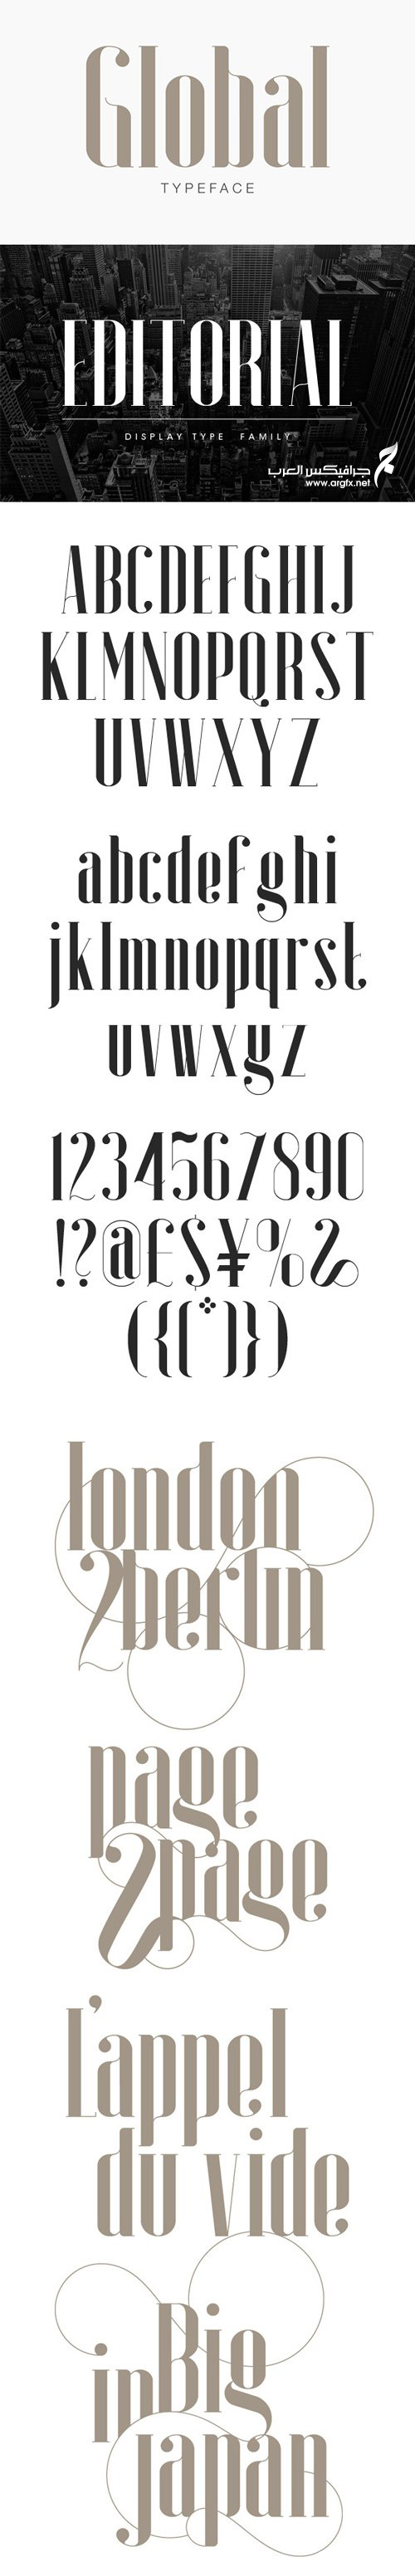  GraphicRiver - Global Typeface - 10534785